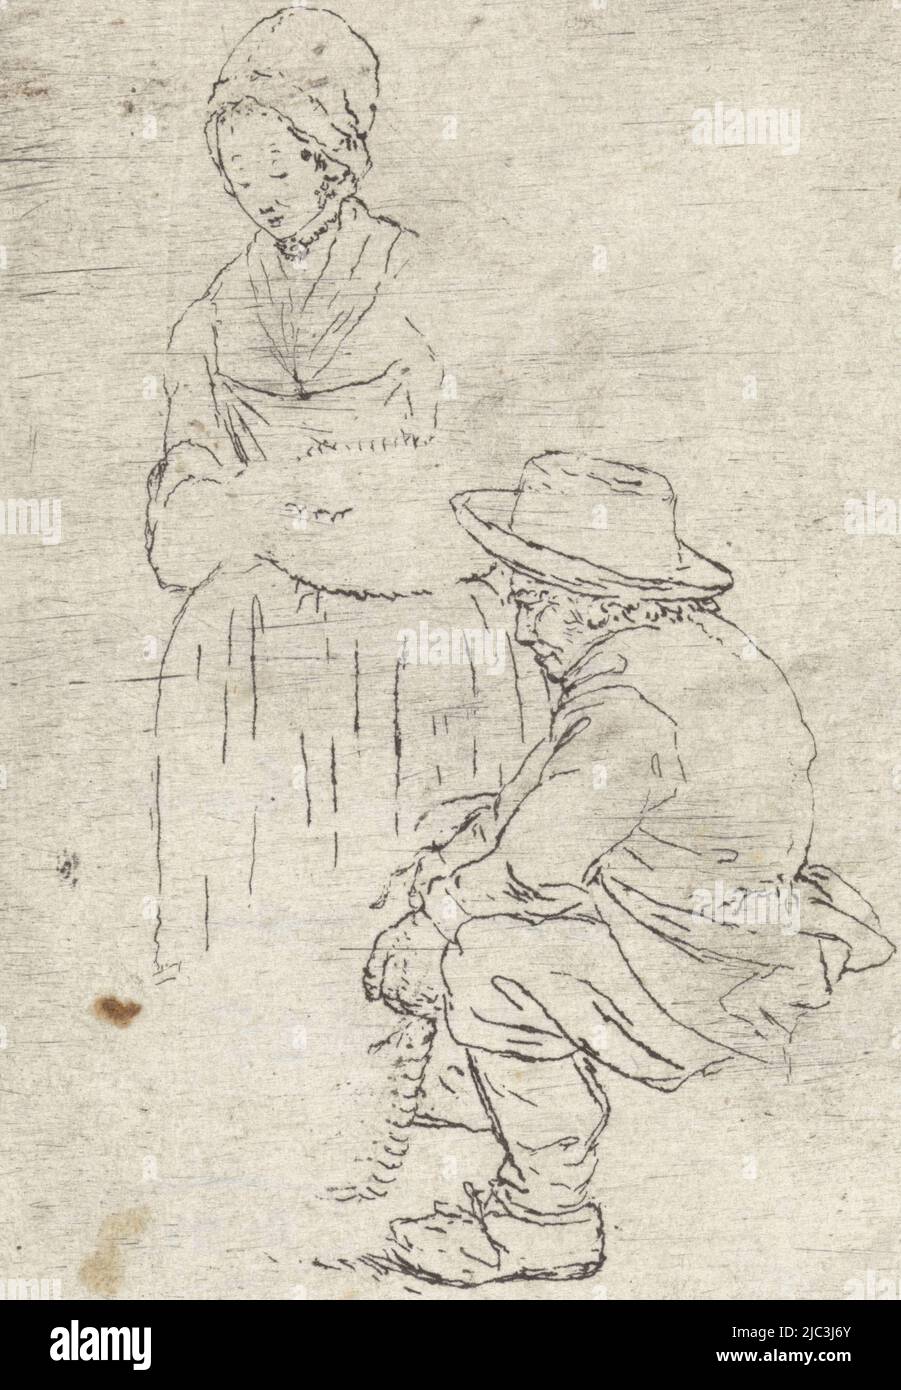 A seated man with hat and clogs, facing left. Next to him is a woman with bowed head, she wears a cap and apron., Farmer and Farmer's Wife, print maker: Johannes Janson, (possibly), print maker: Johannes Christiaan Janson, (possibly), print maker: Pieter Janson, (possibly), 1739 - 1851, paper, etching, h 122 mm × w 73 mm Stock Photo